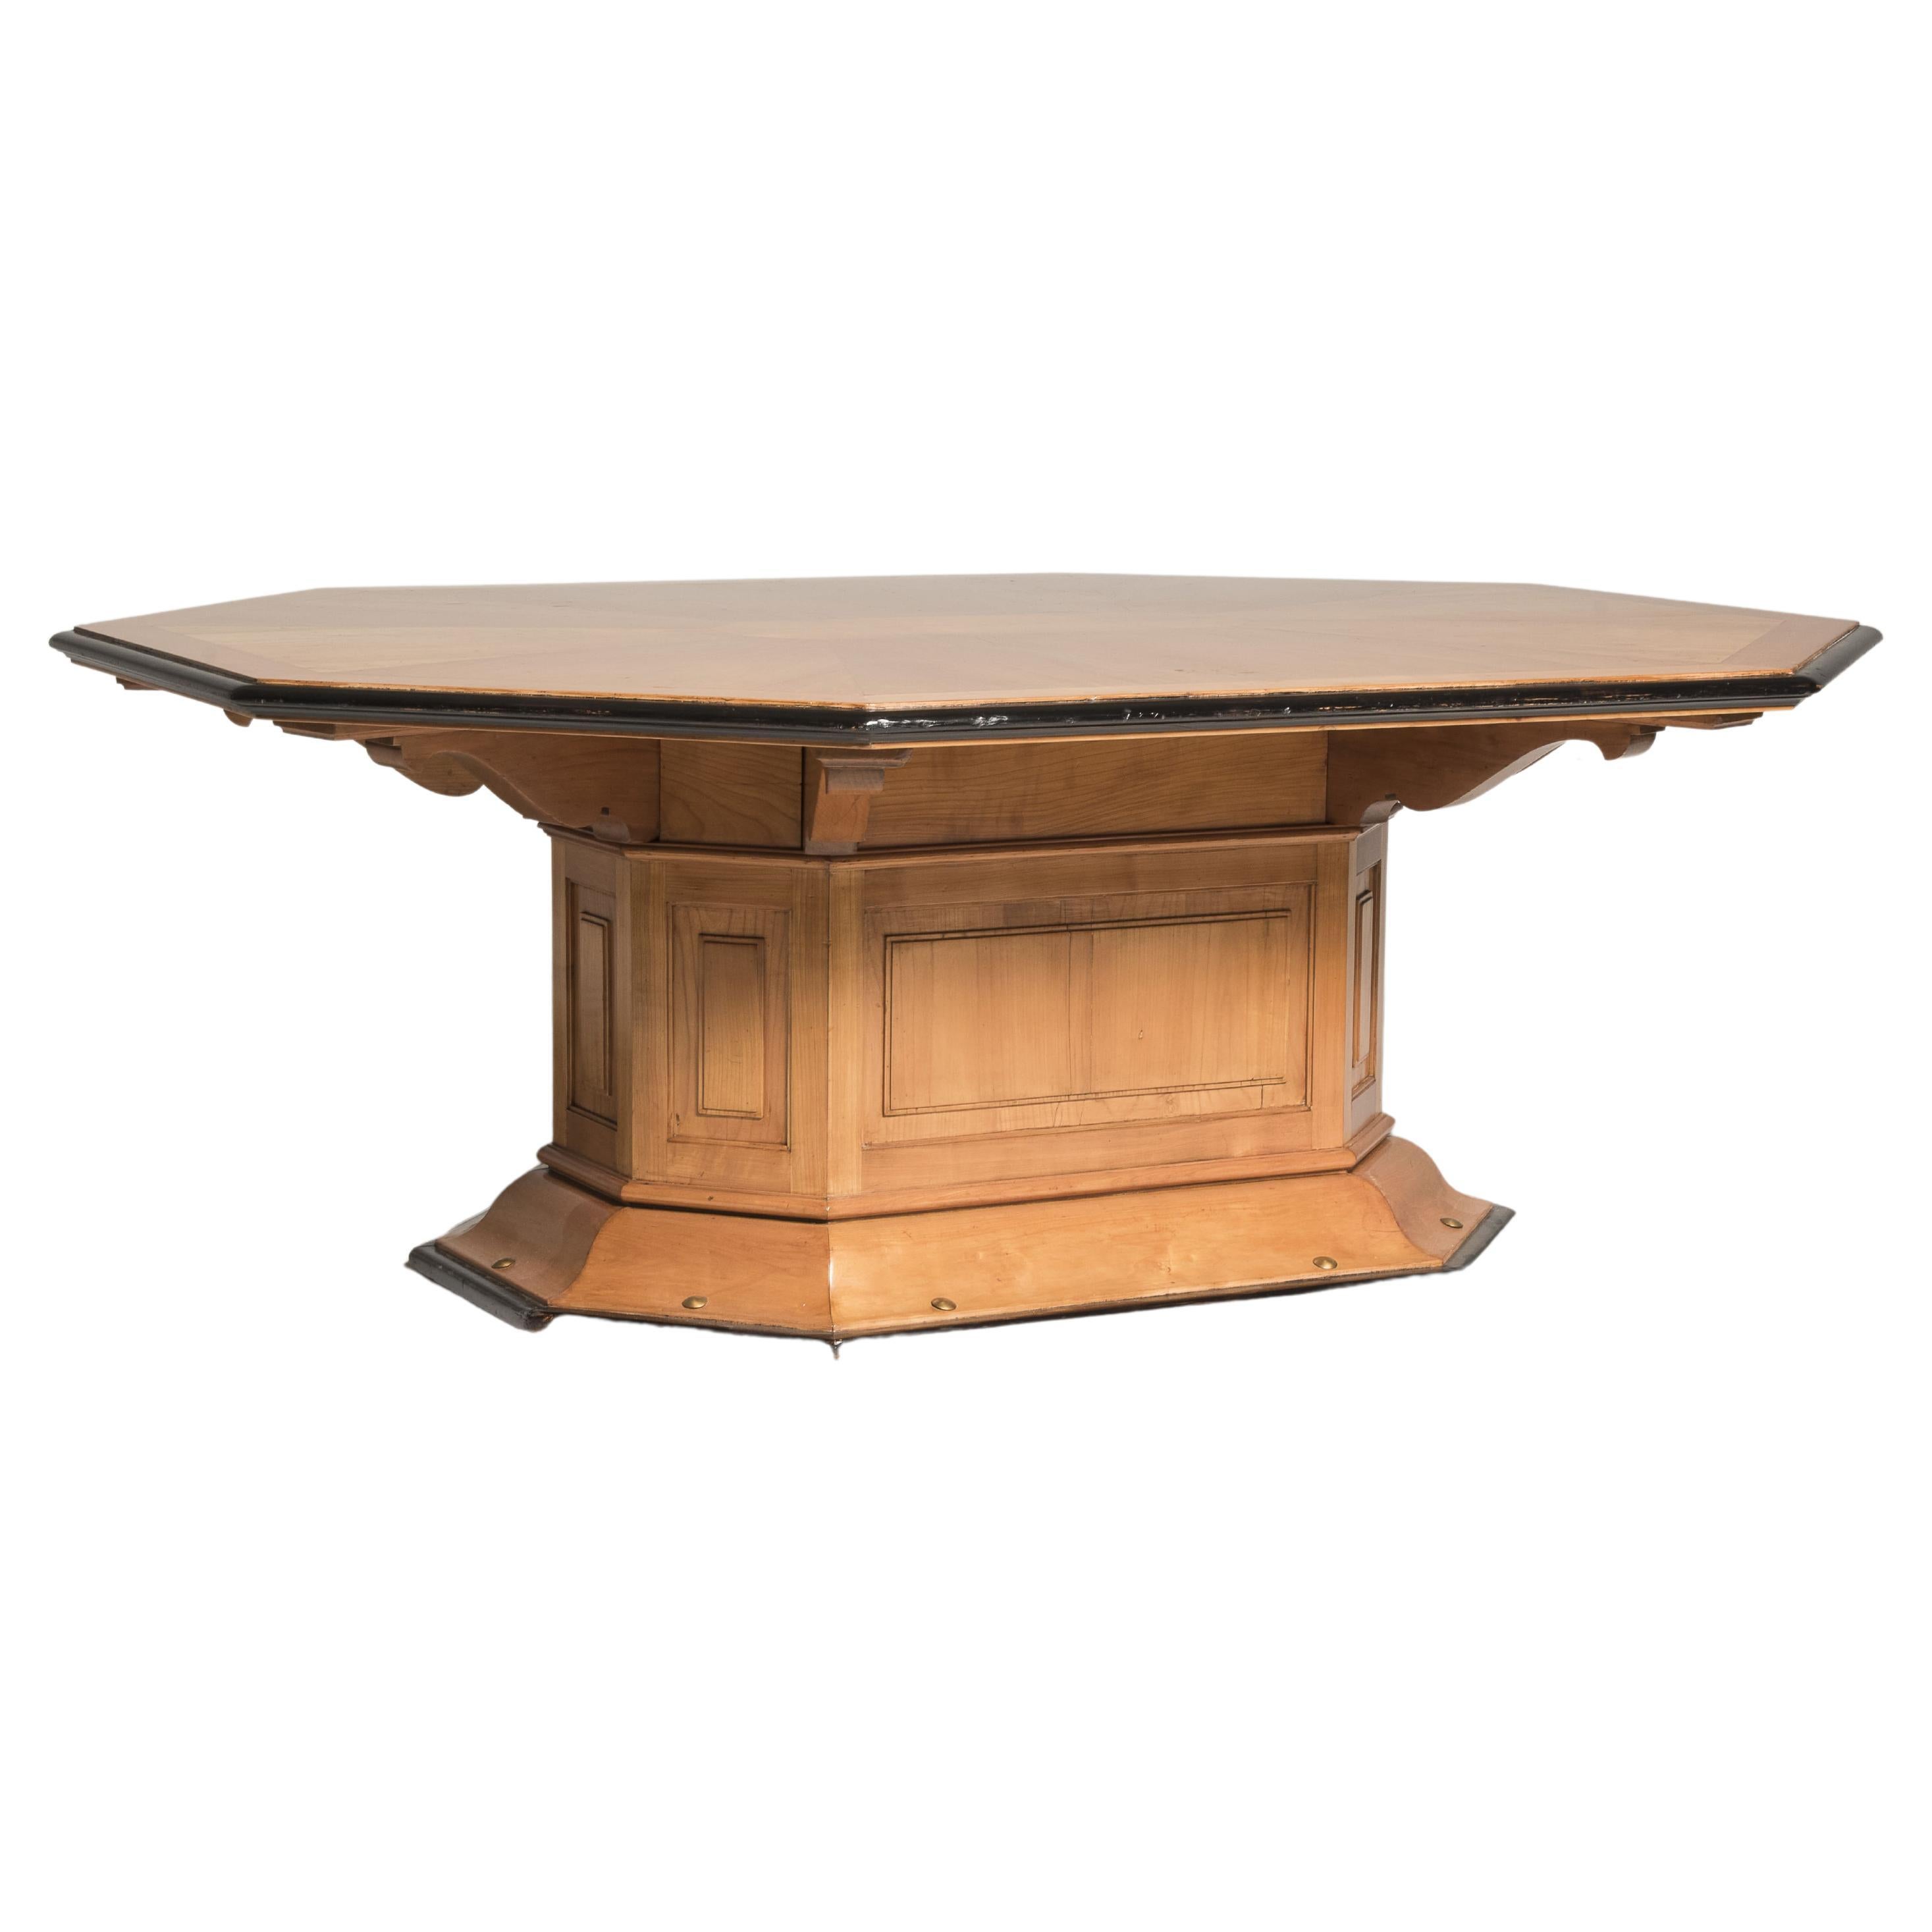 Art Deco Octagonal Cherrywood Table with Black Borders and Brass Details